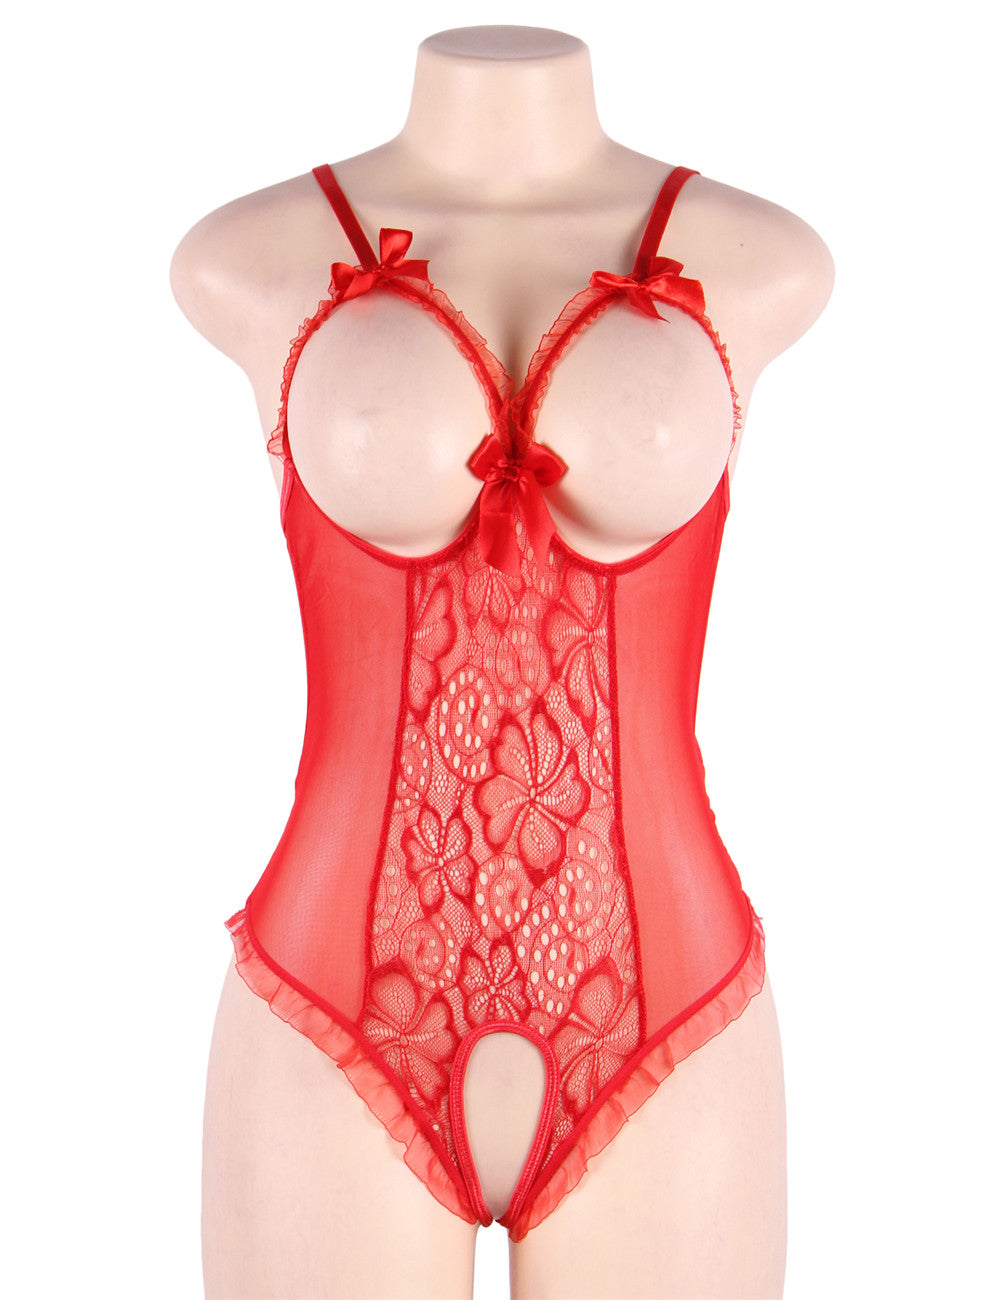 Lace Mesh Open Cup Crotchless One-Piece Teddy